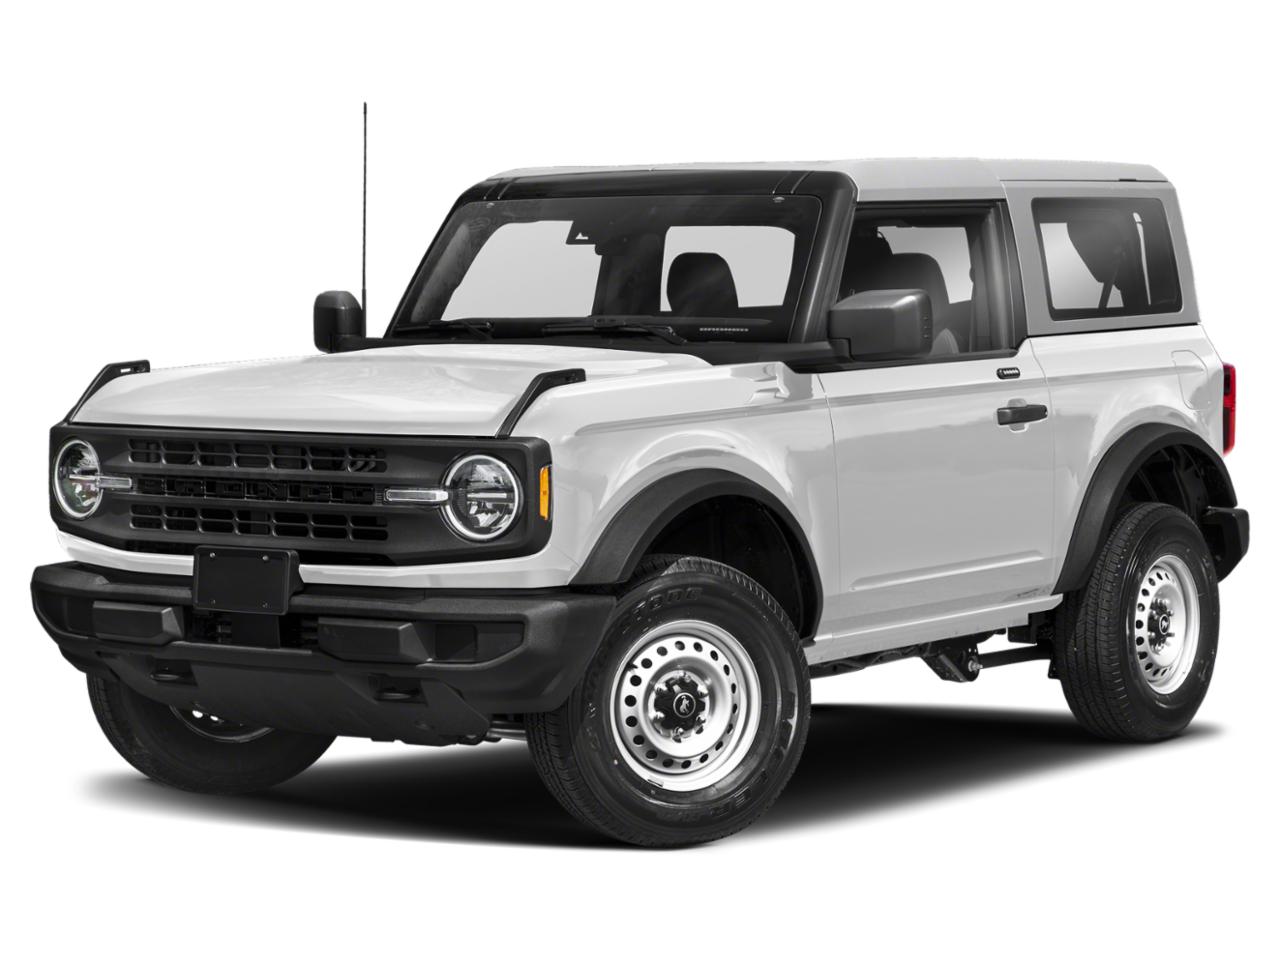 2023 Ford Bronco Vehicle Photo in Pilot Point, TX 76258-6053